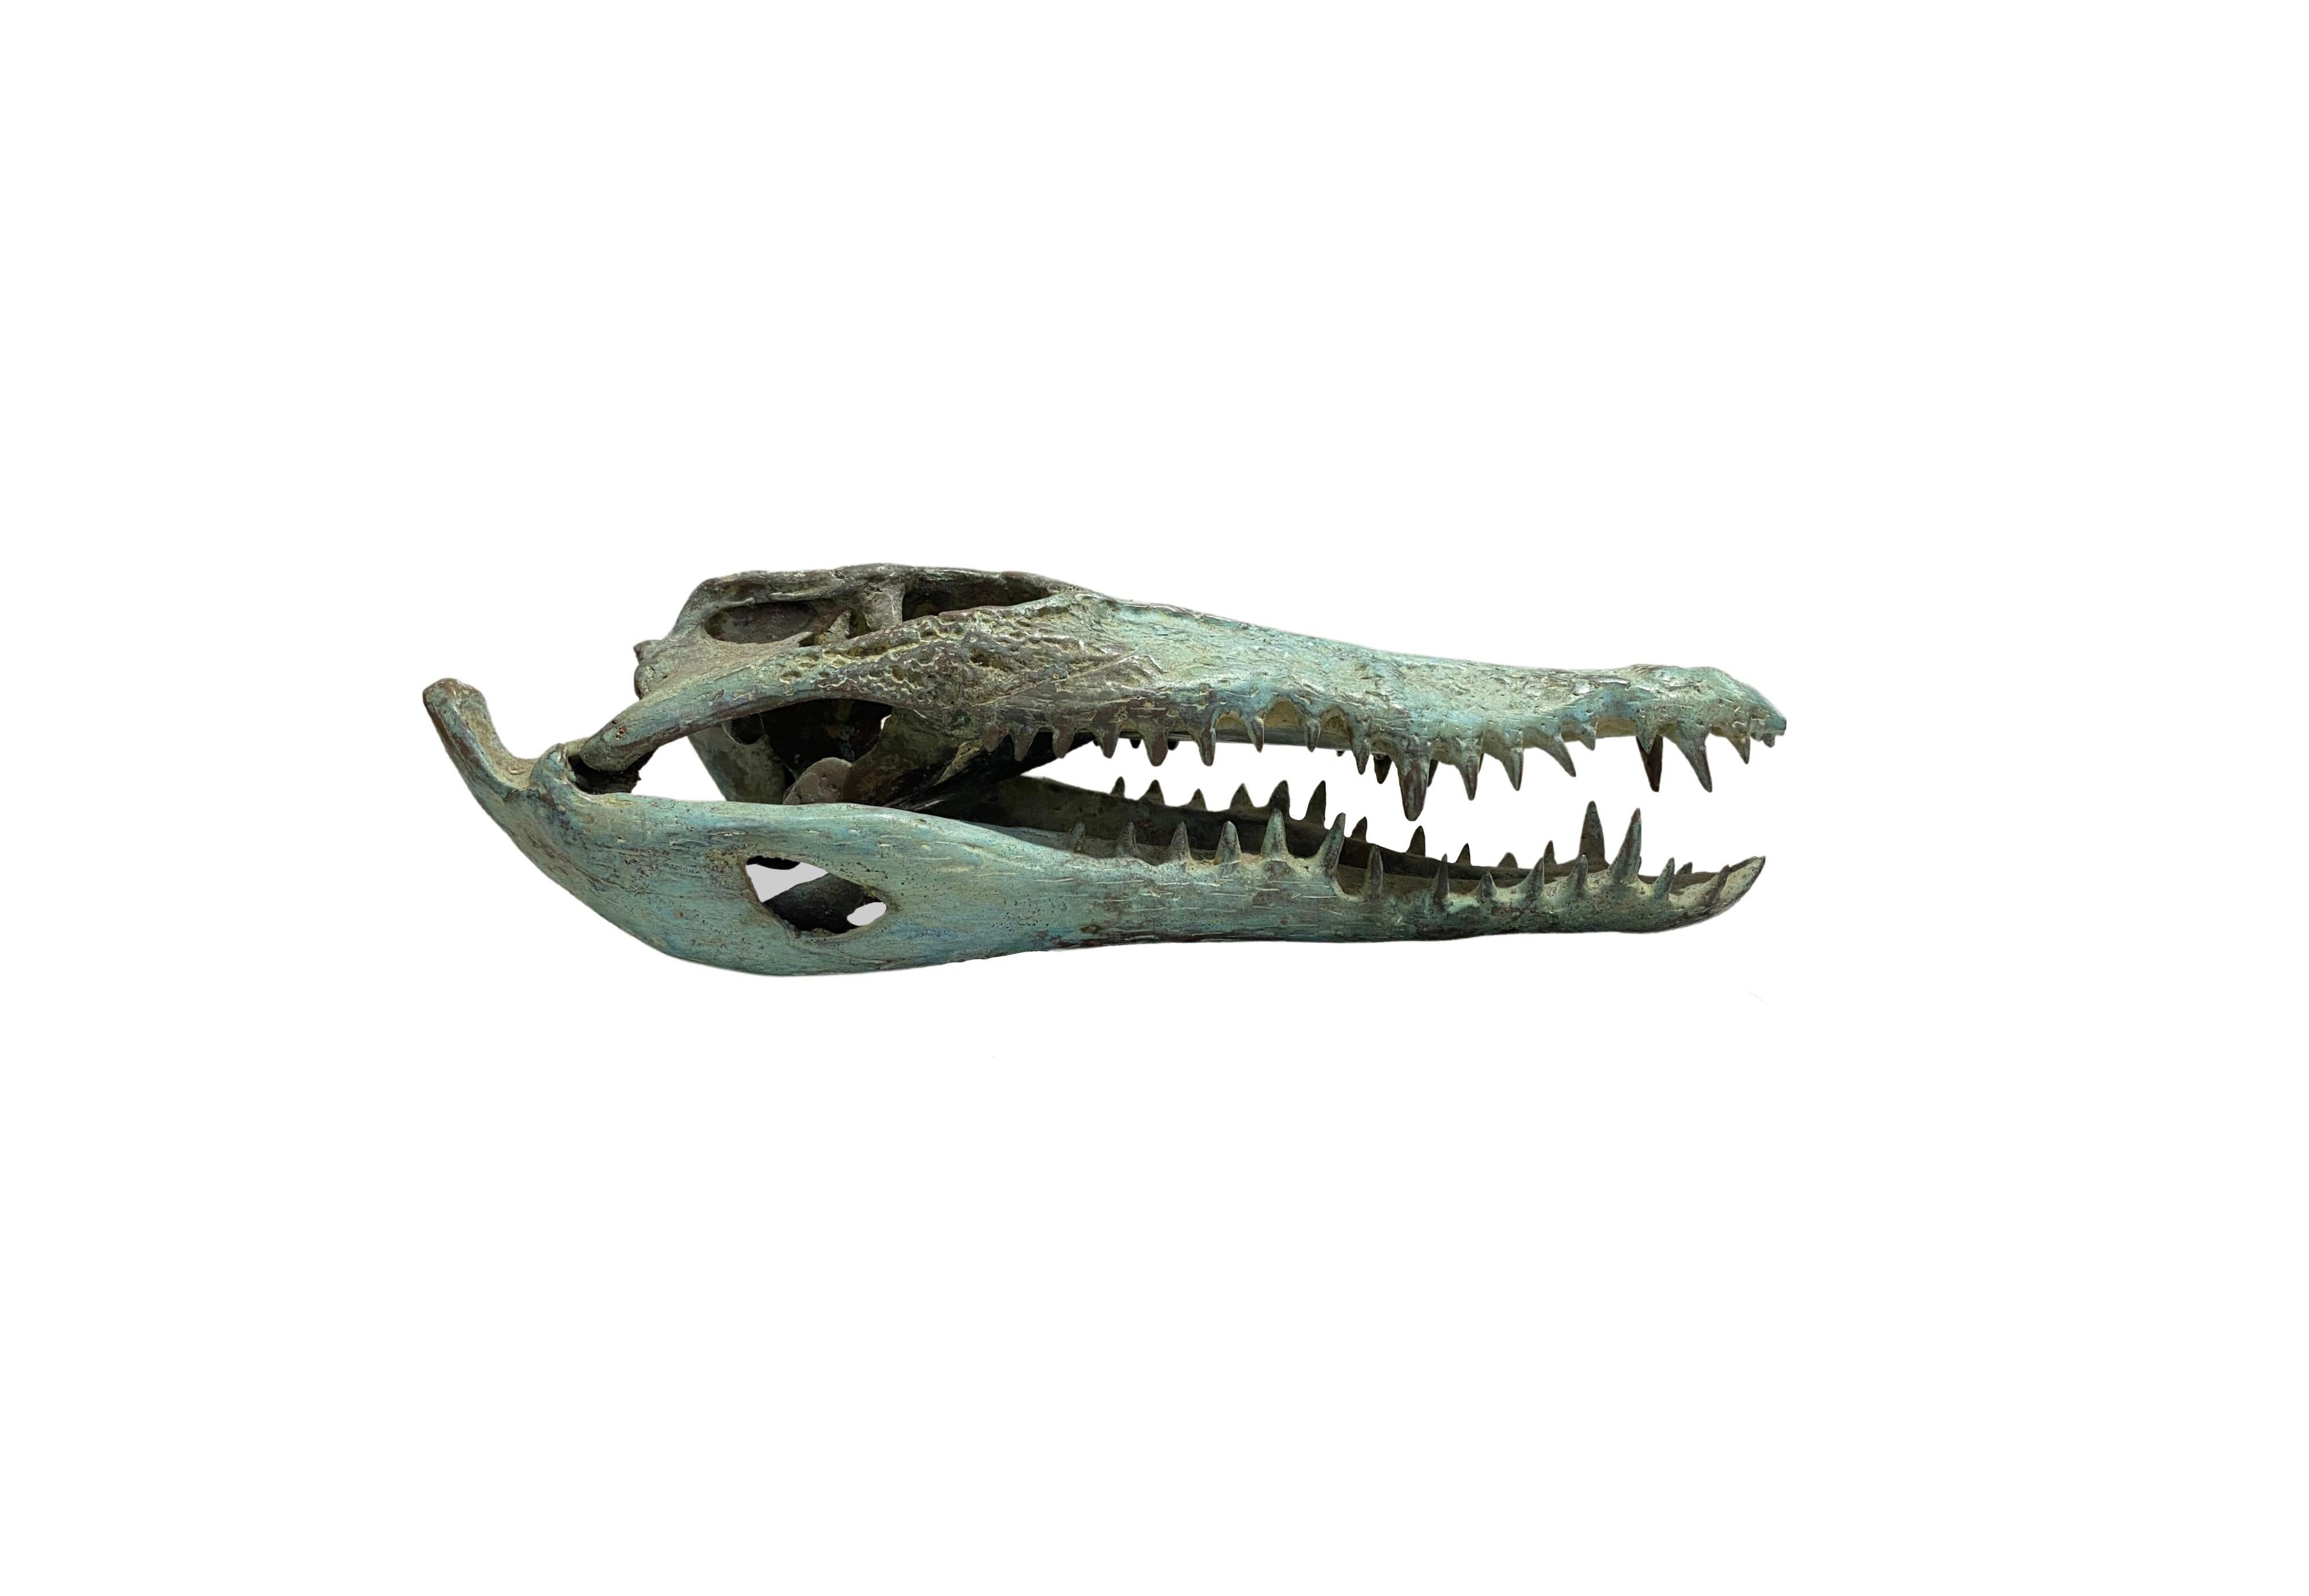 A wonderful example of a hollow-cast bronze crocodile skull. This piece features wonderful detail and resemblance to a real specimen. An exotic piece certain to invoke conversation. Suitable for both indoor or outdoor spaces. To achieve its its